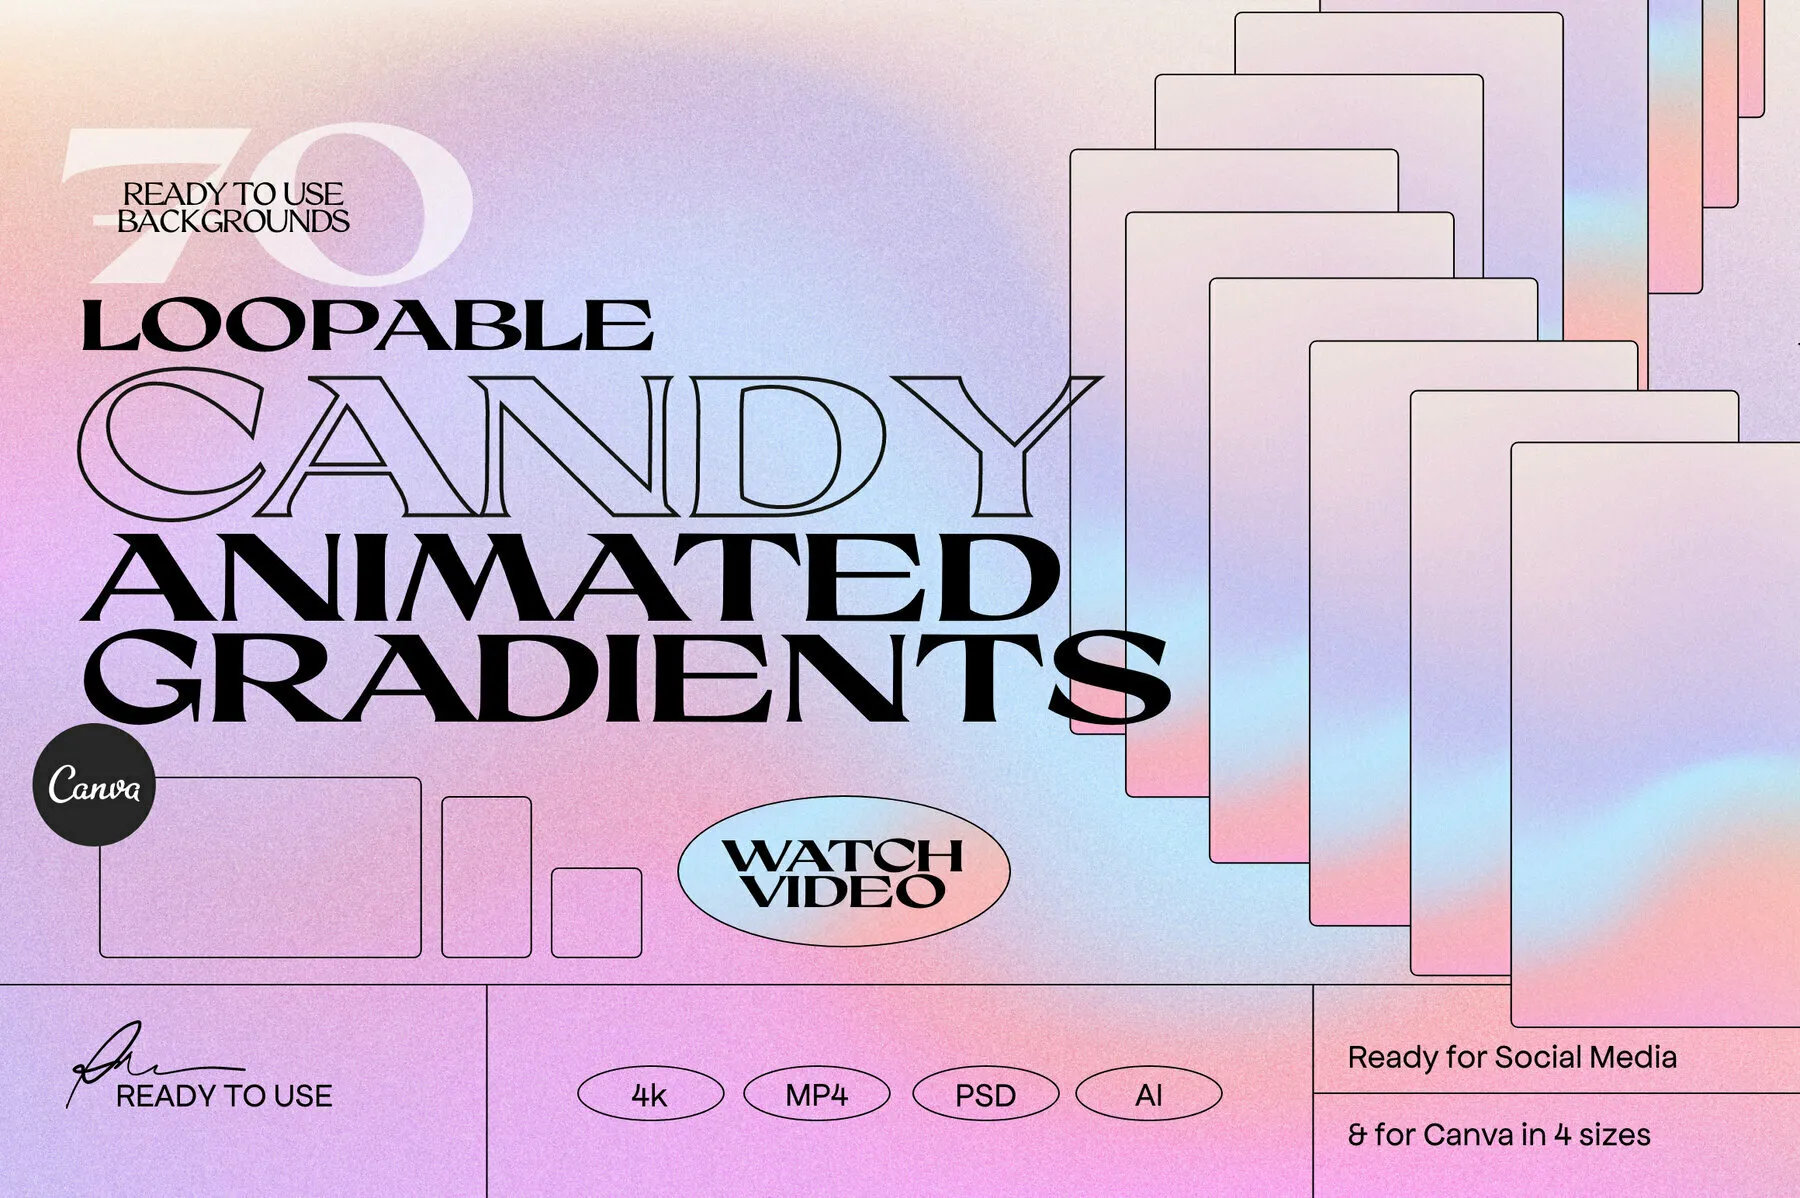 CANDY - Animated Gradients